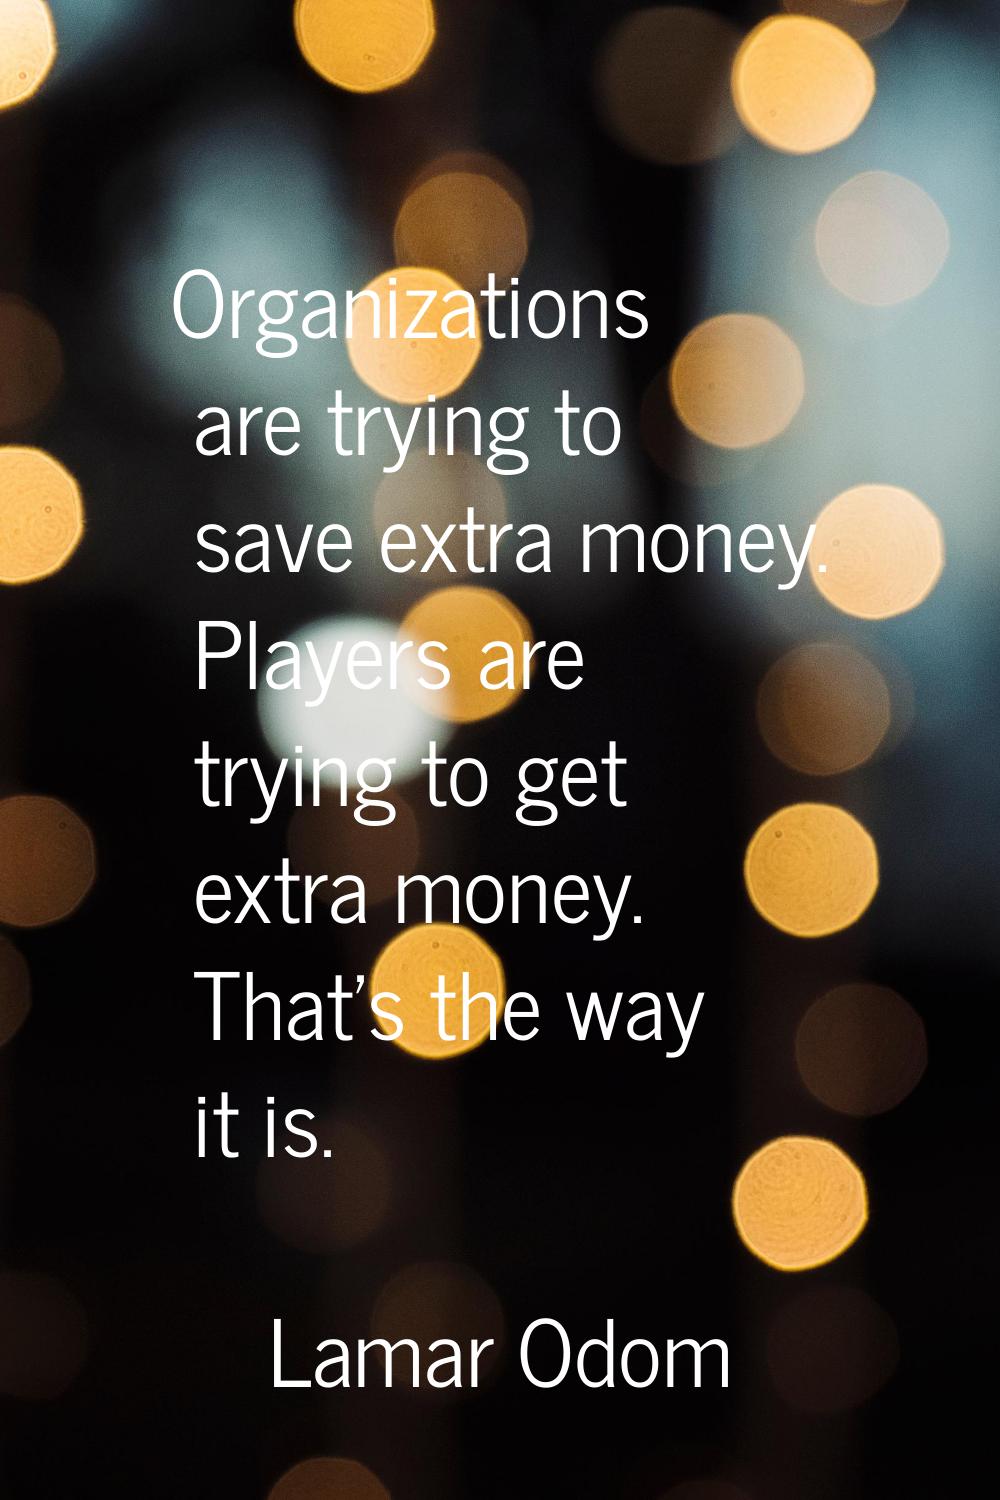 Organizations are trying to save extra money. Players are trying to get extra money. That's the way